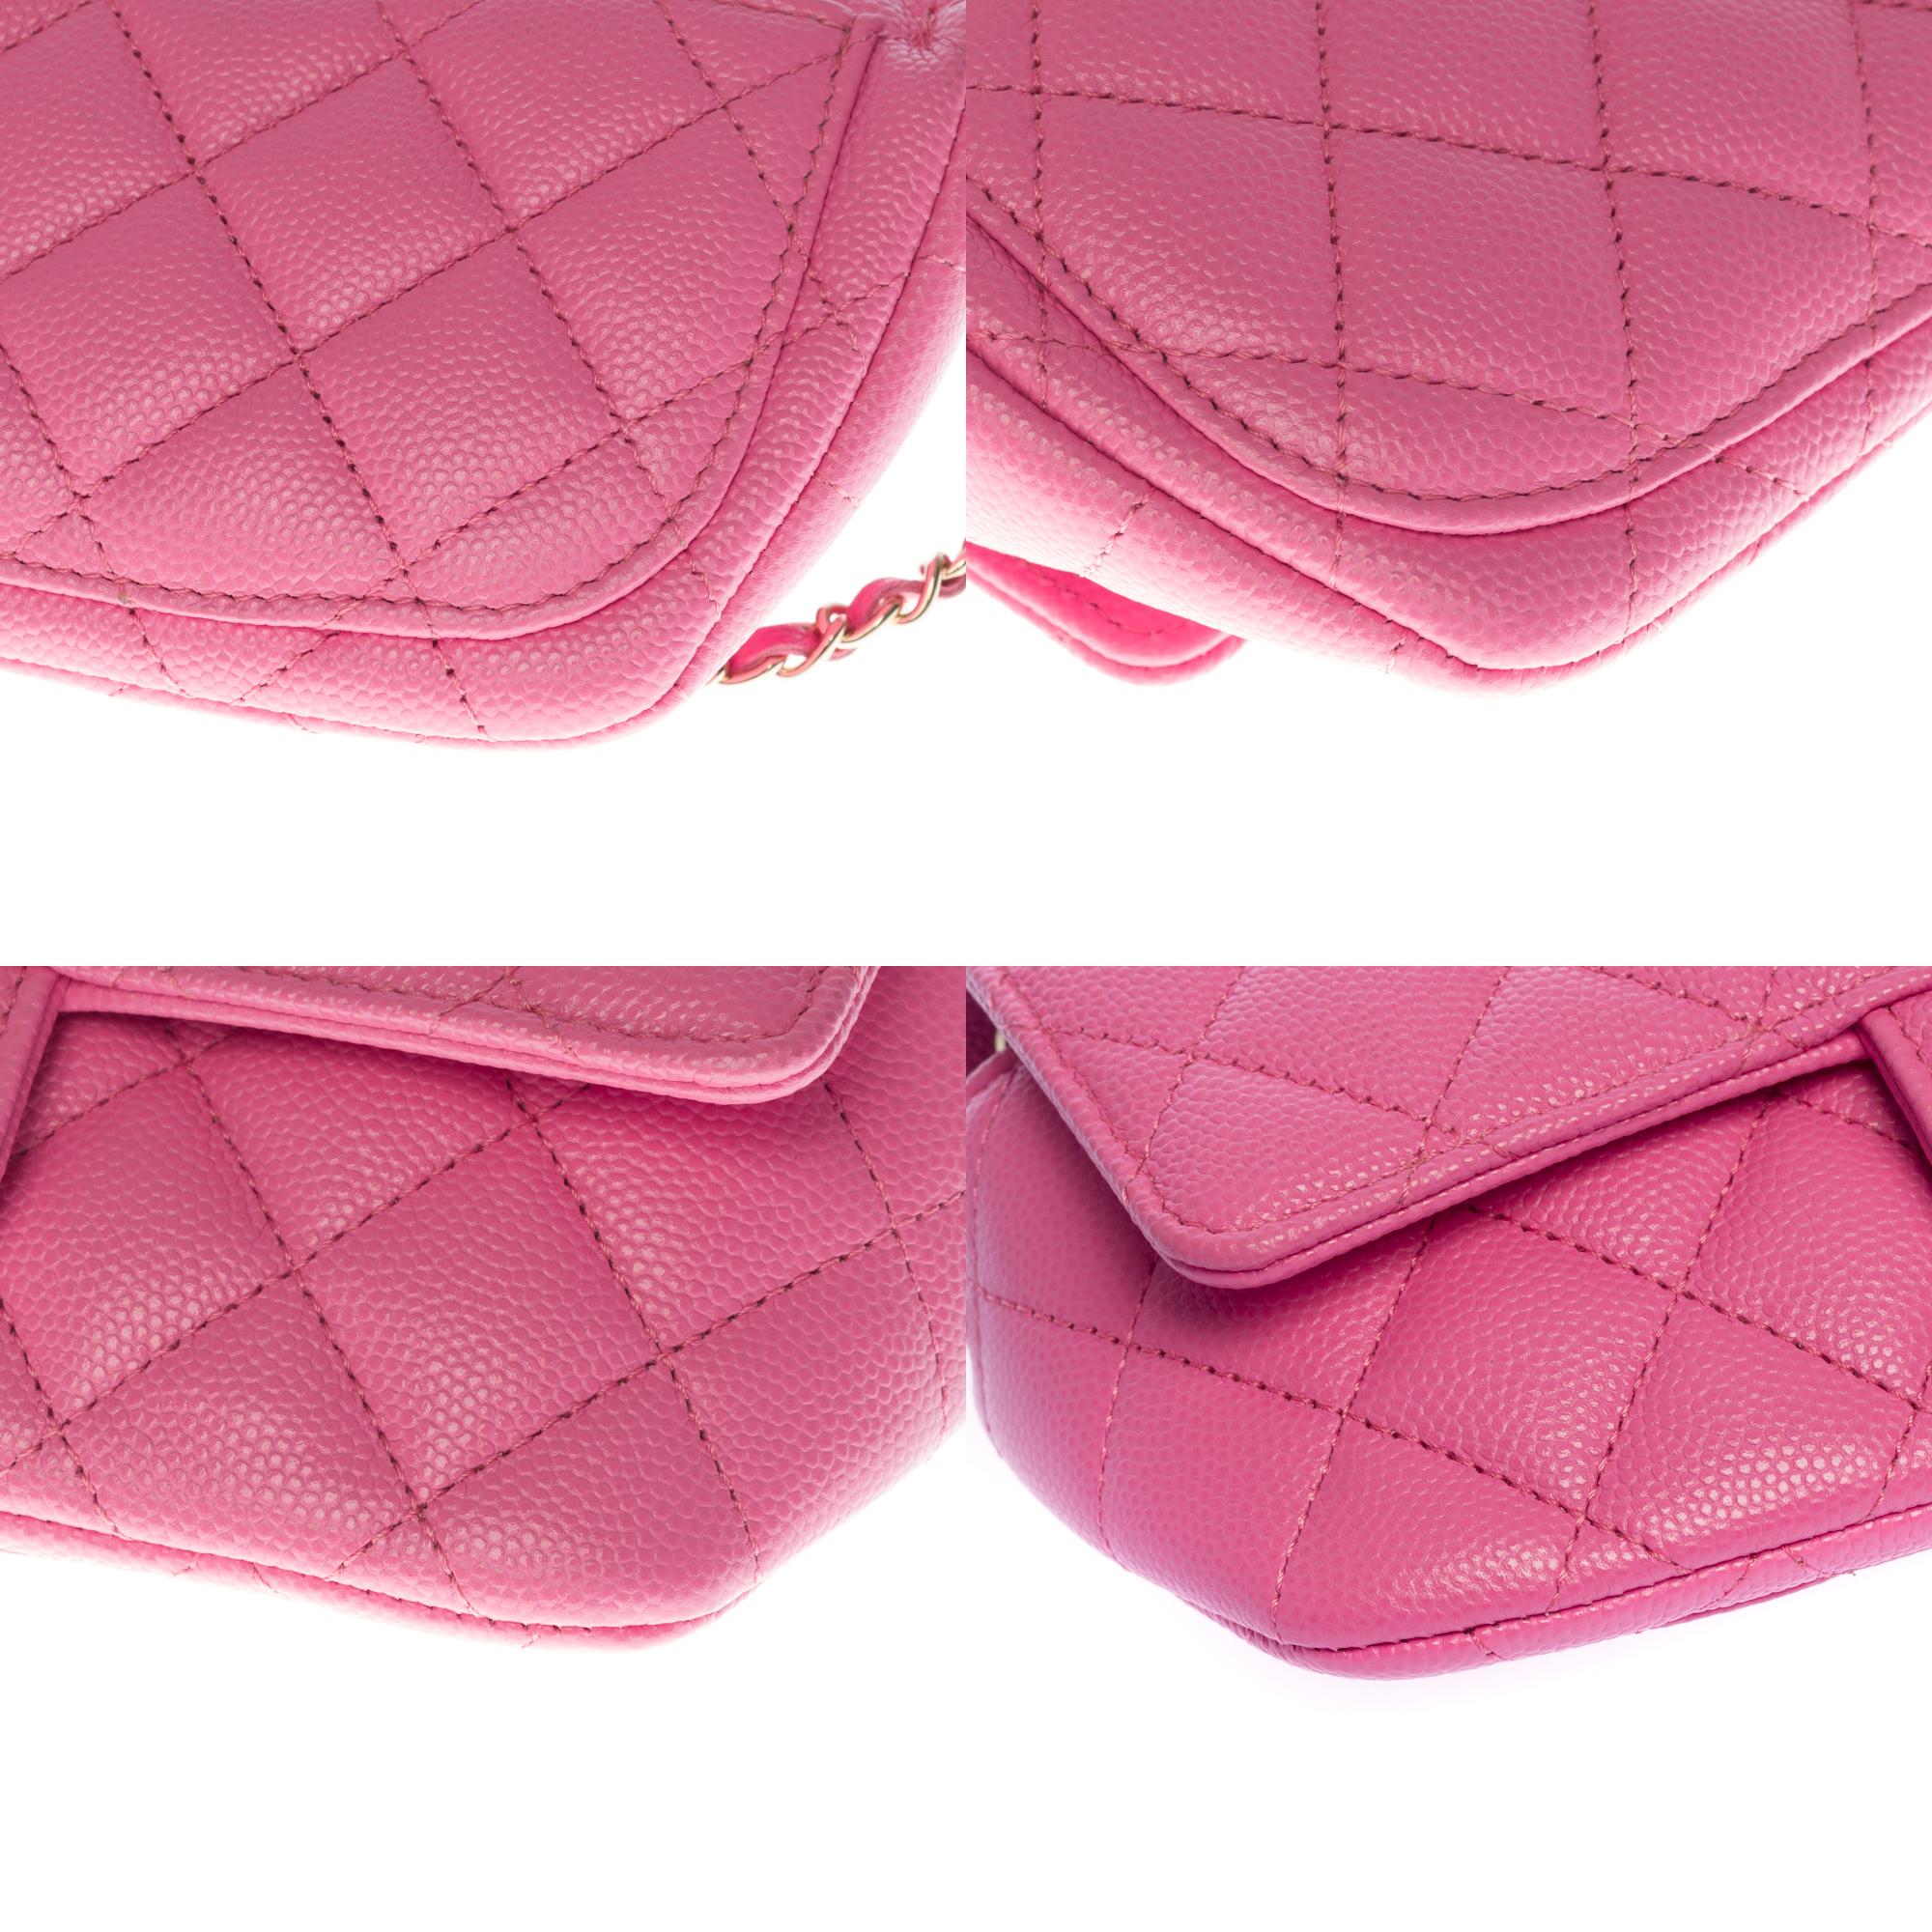 Chanel Classique Sunglasses Bag/Case in pink caviar quilted leather, Champagne HW 1